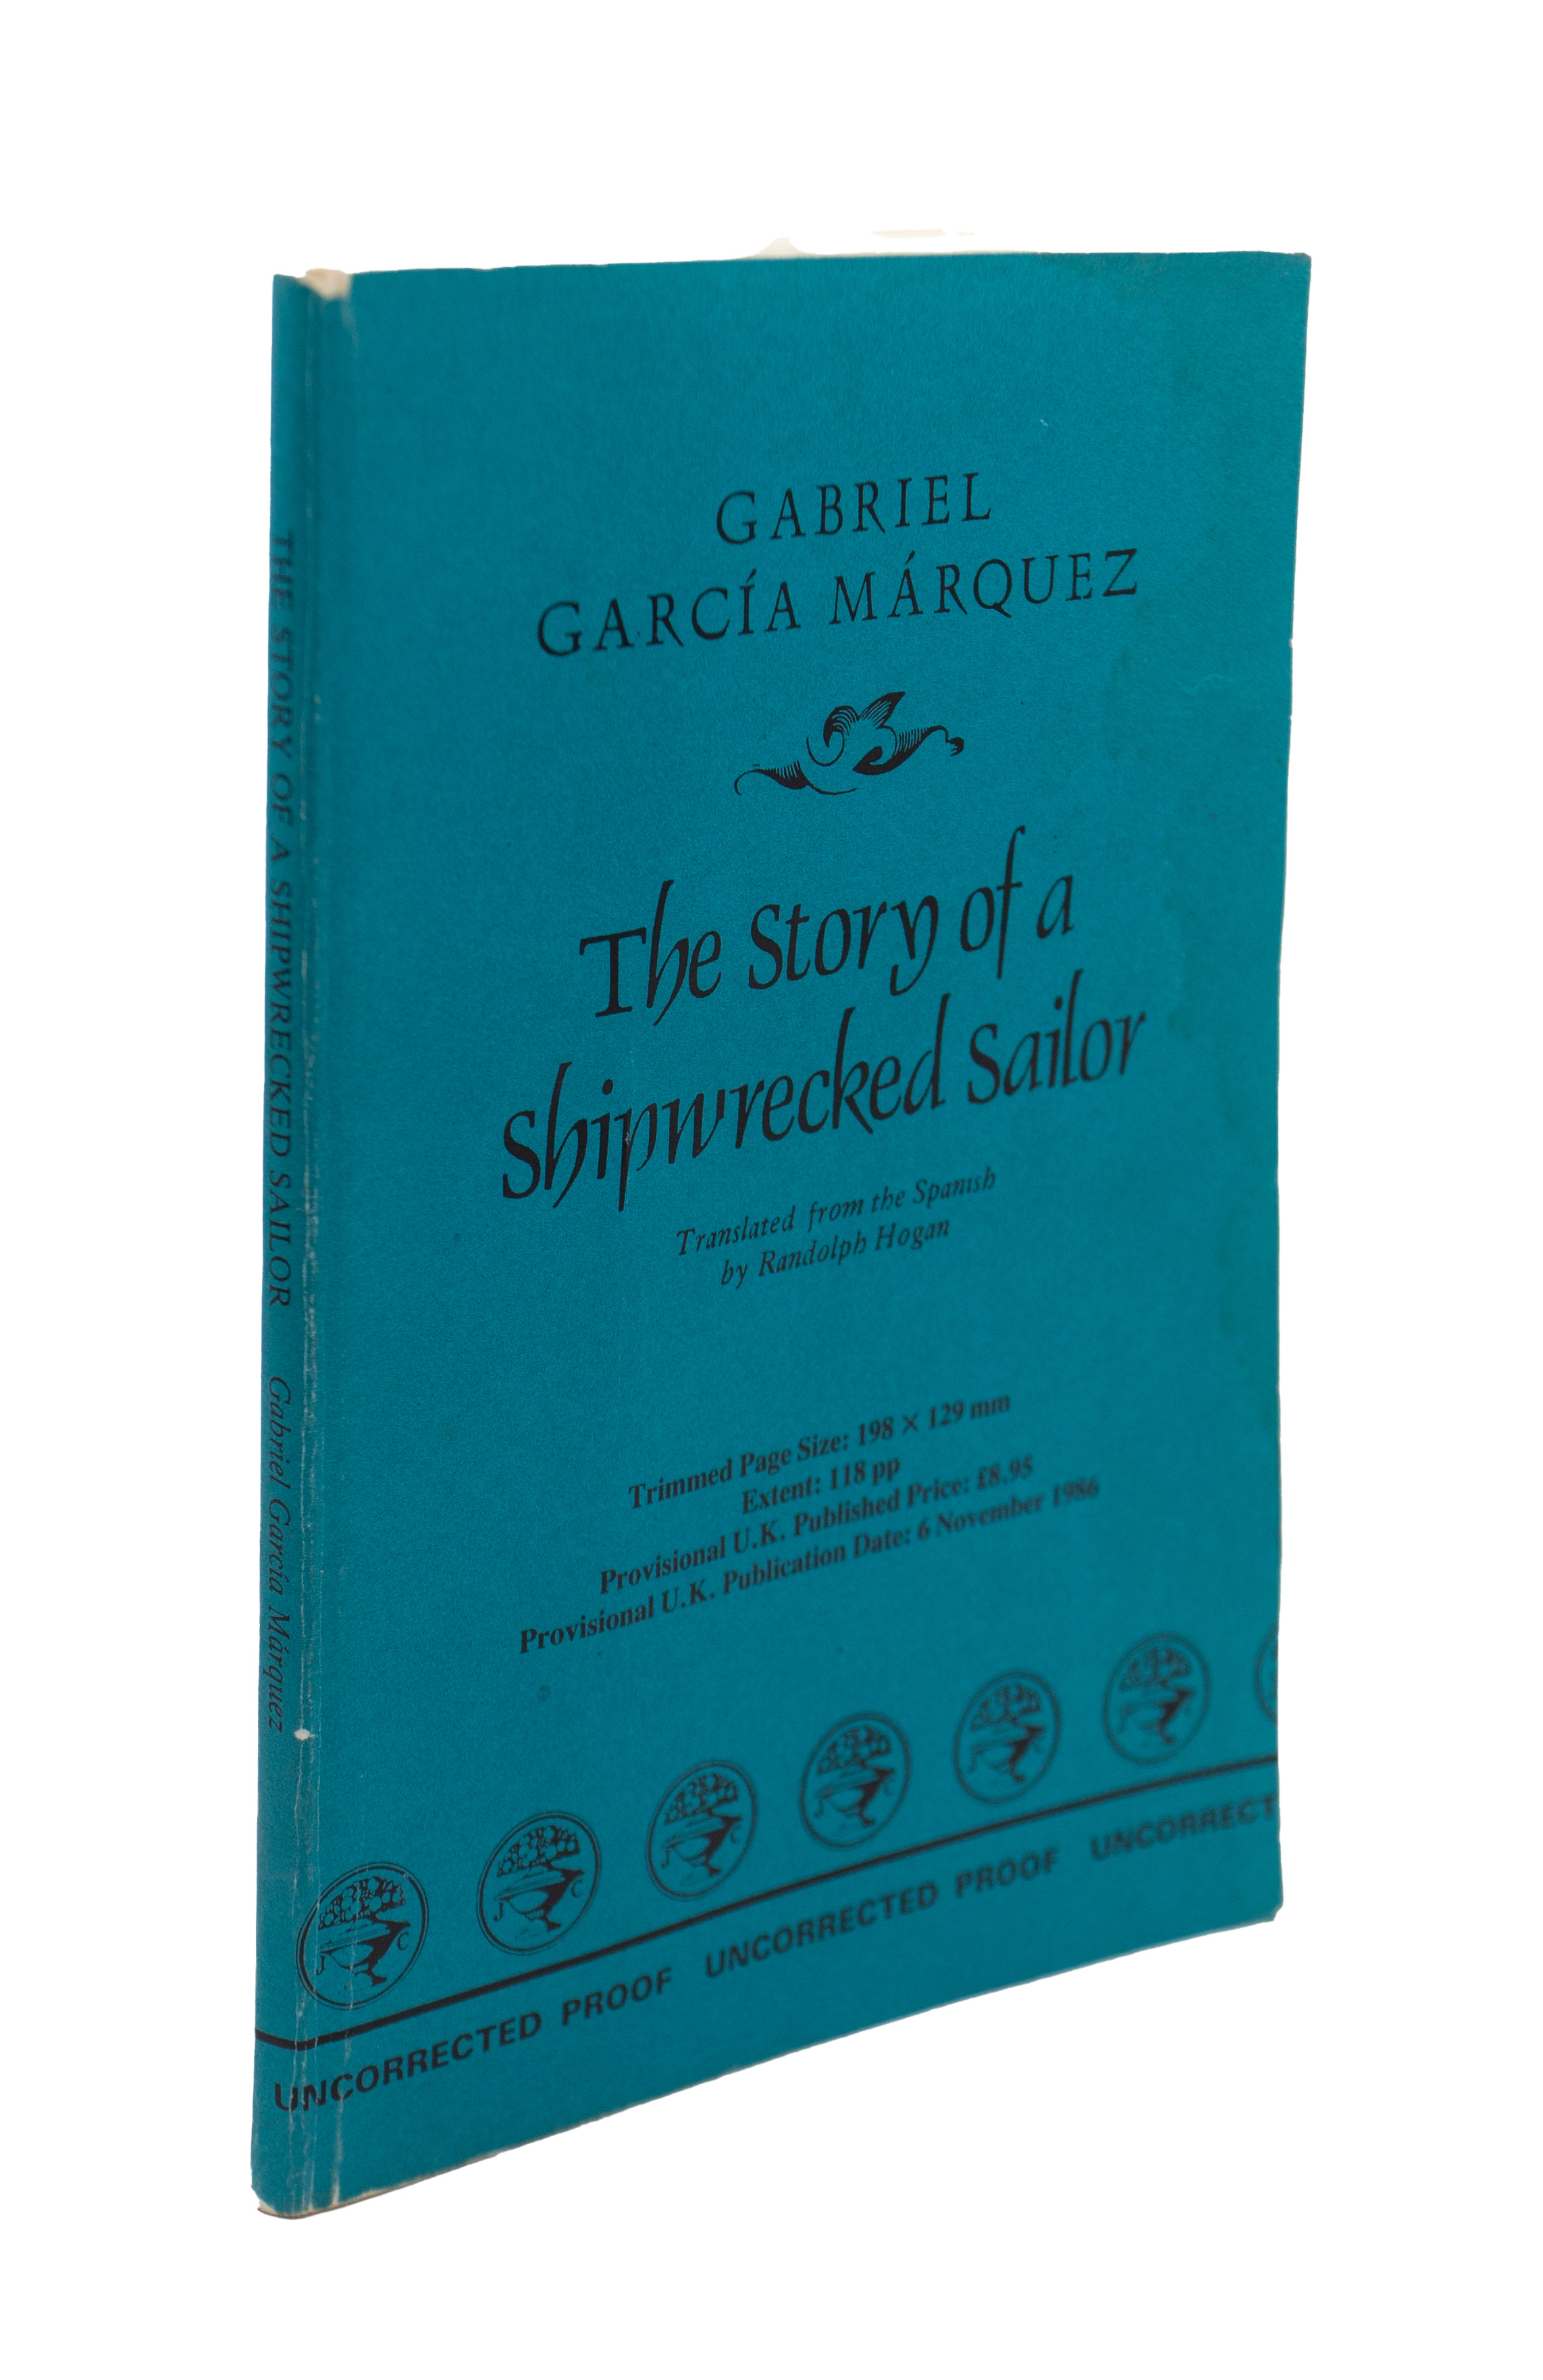 Marquez, Gabriel Garcia. The Story of a Shipwrecked Sailor, Uncorrected Proof, London: Jonathan